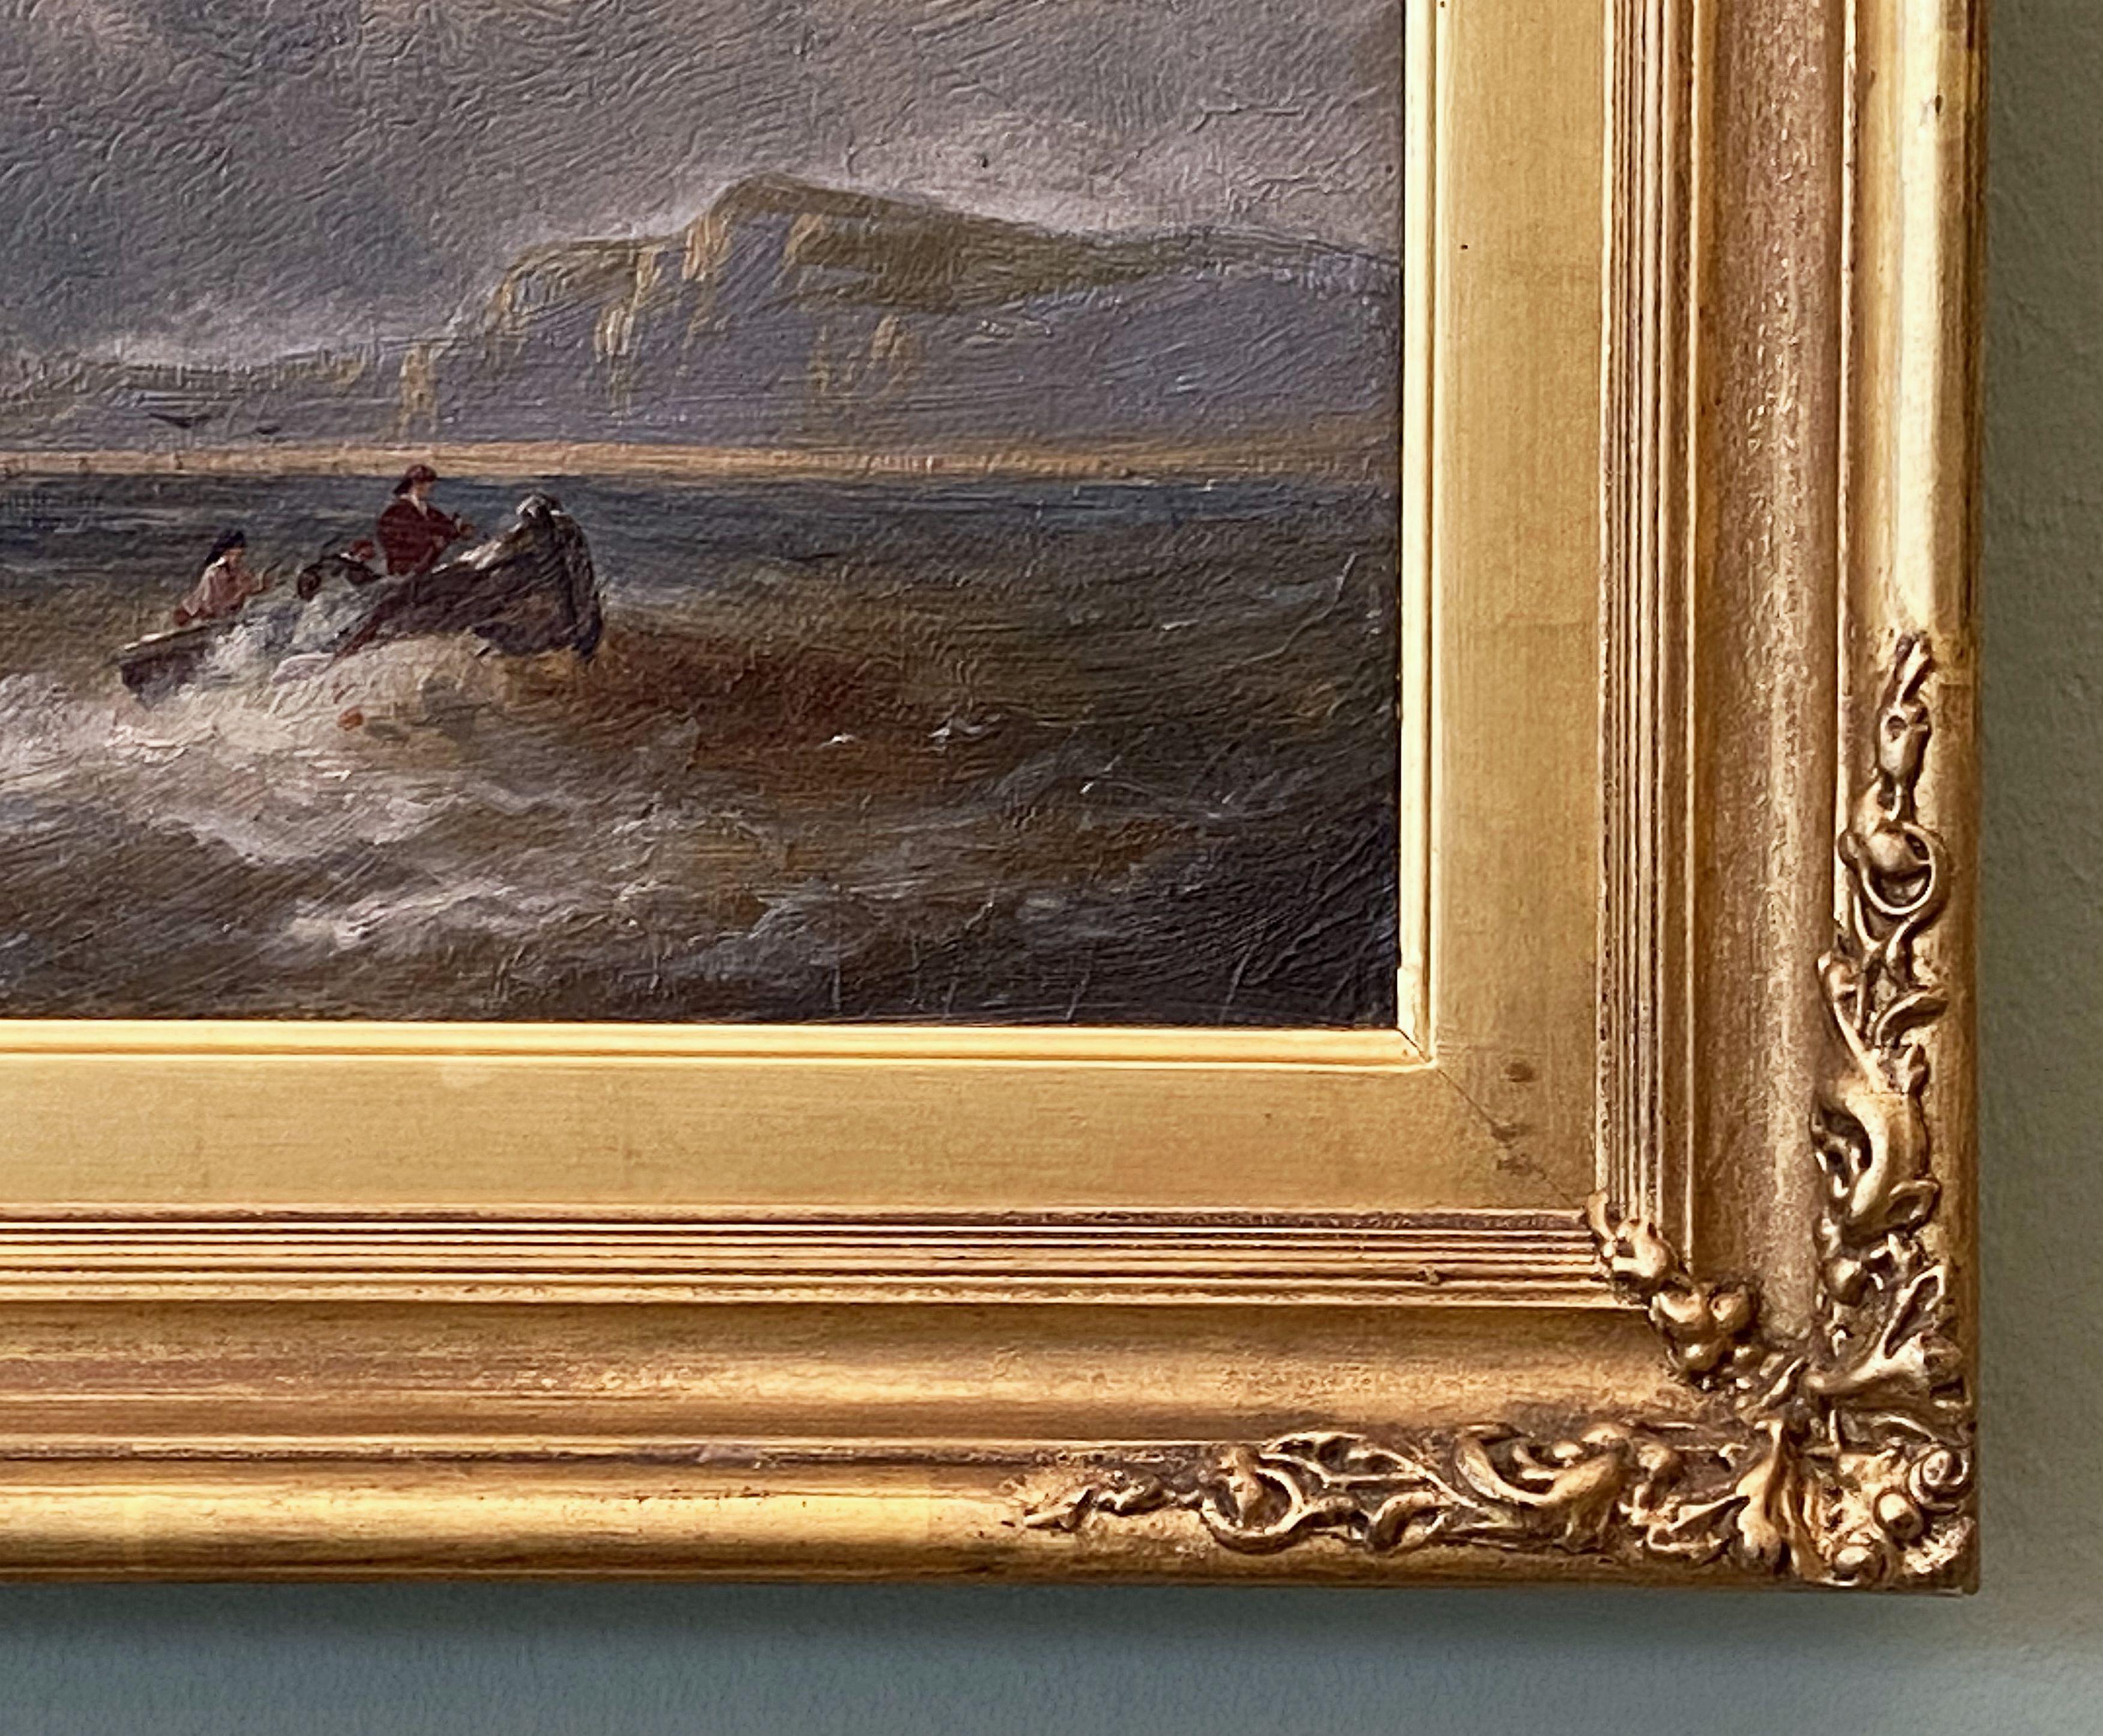 English Oil Painting Seascape or Ocean Scene with Ship in Gilt Frame 4